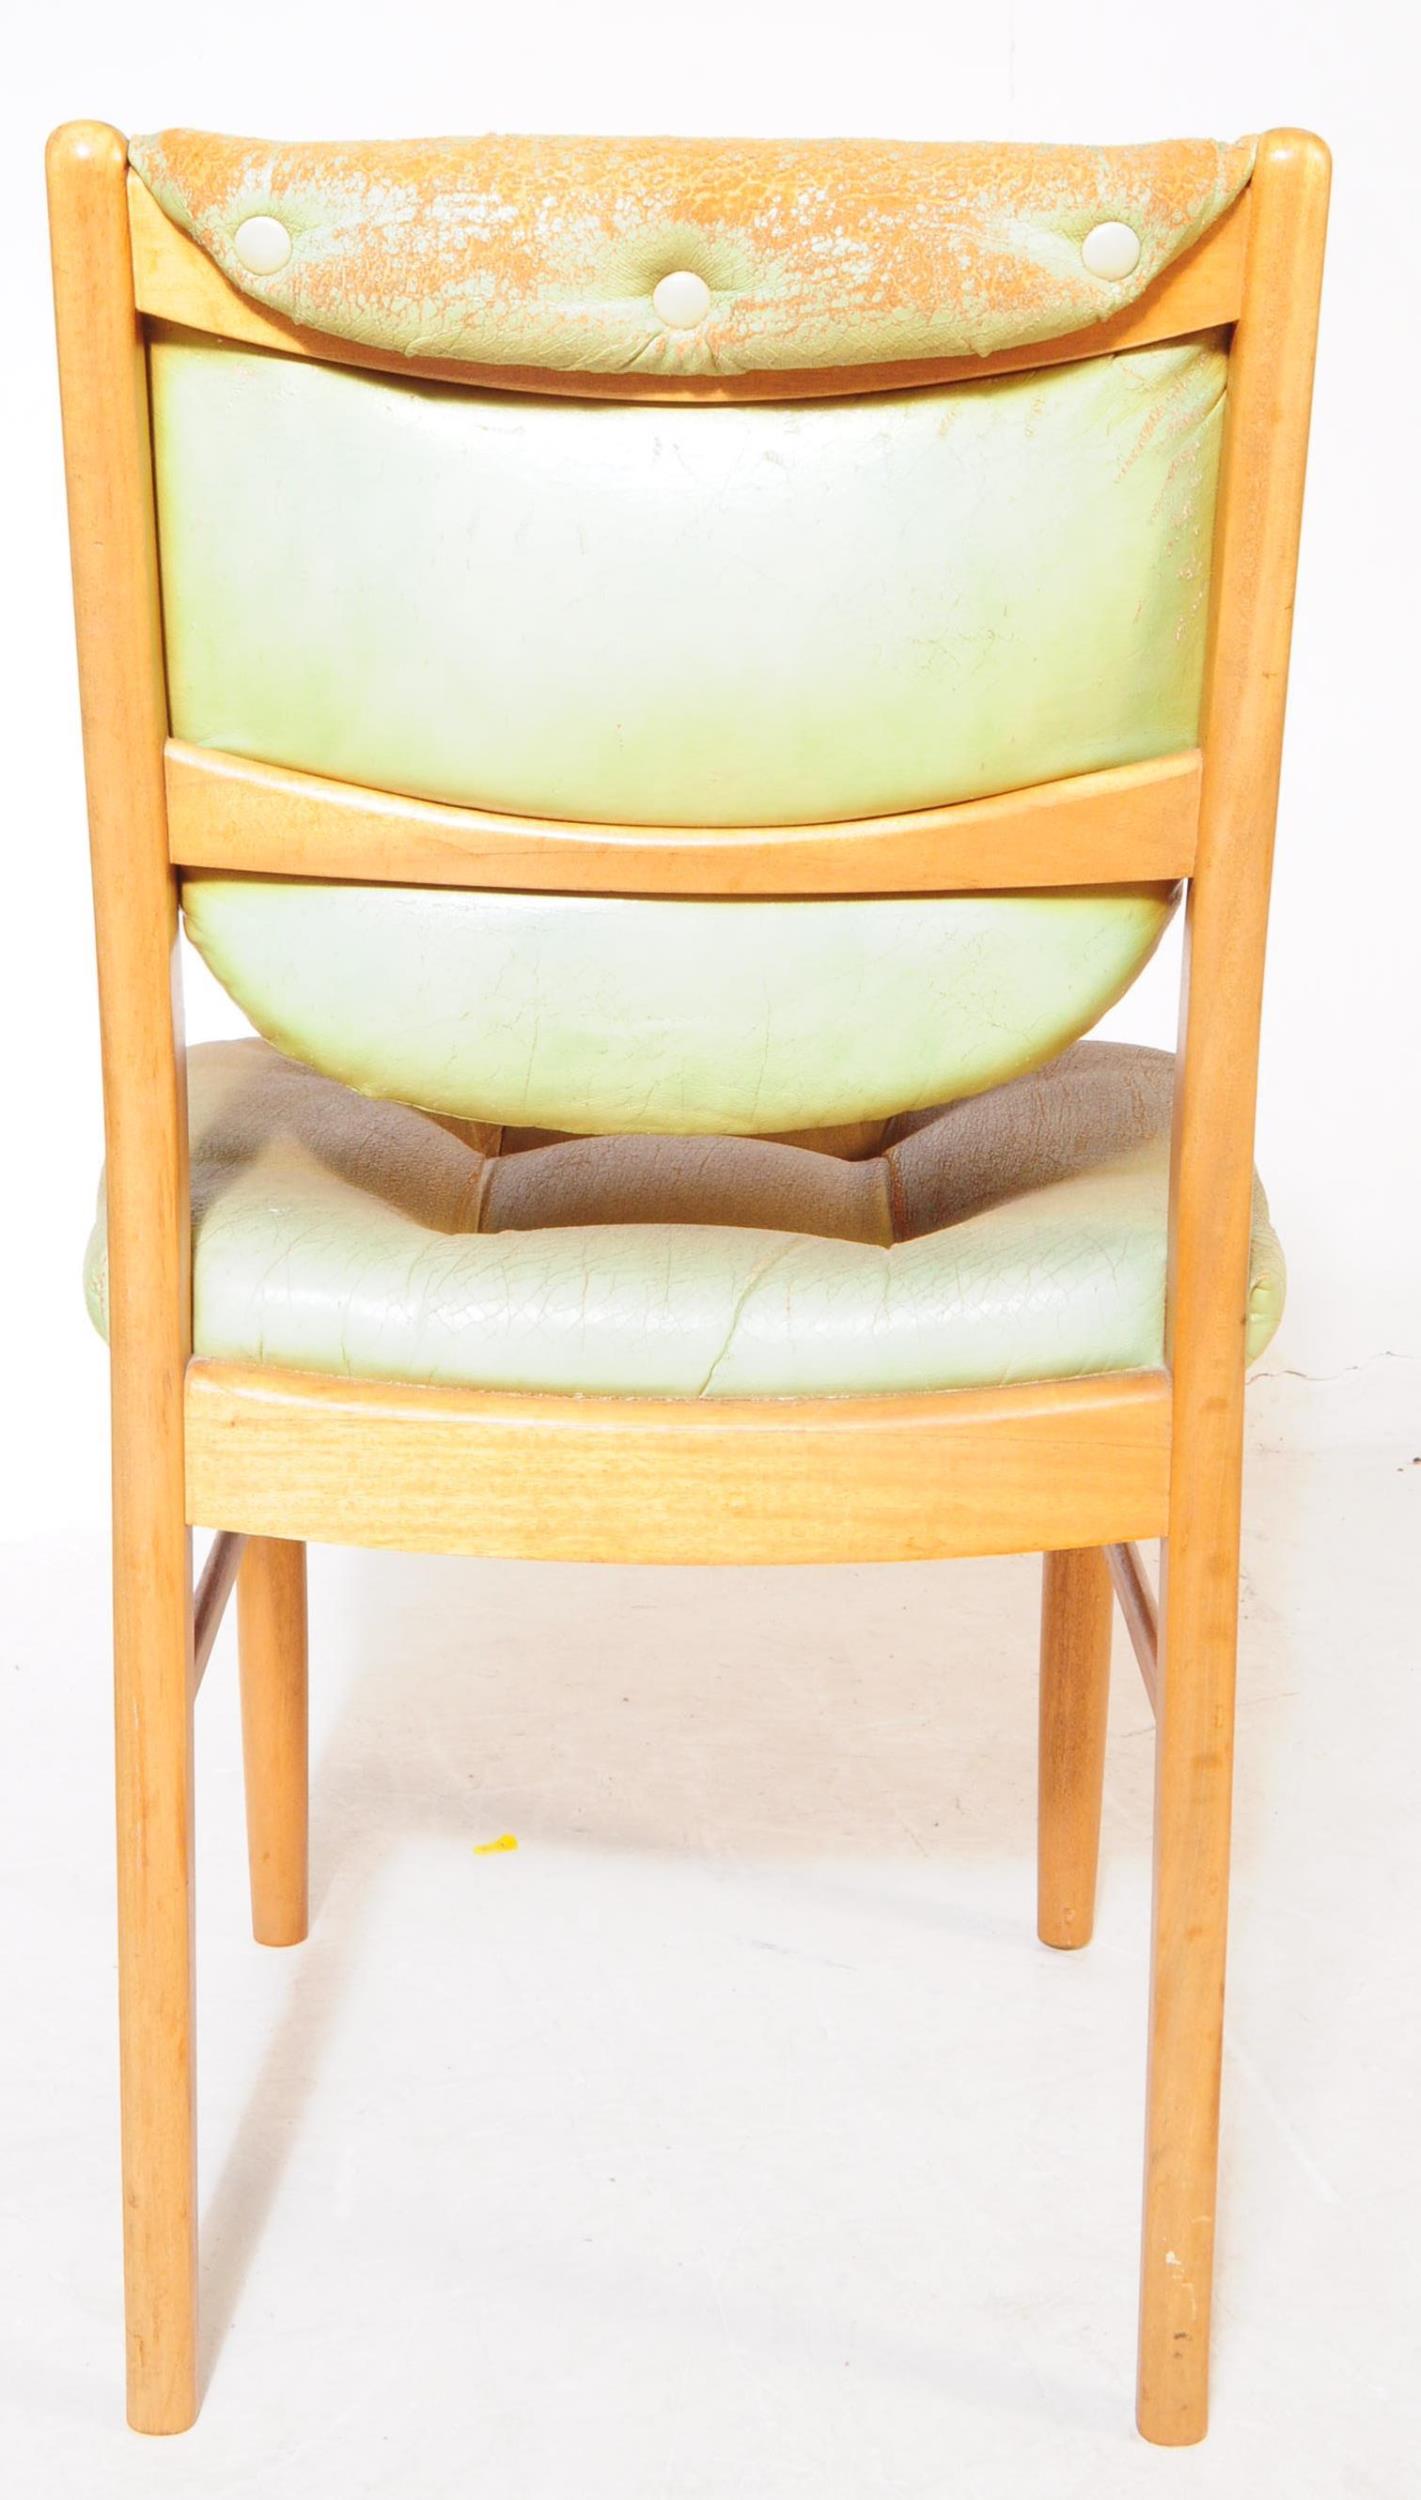 BRITISH MODERN DESIGN - SET OF FOUR VINTAGE DINING CHAIRS - Image 4 of 4